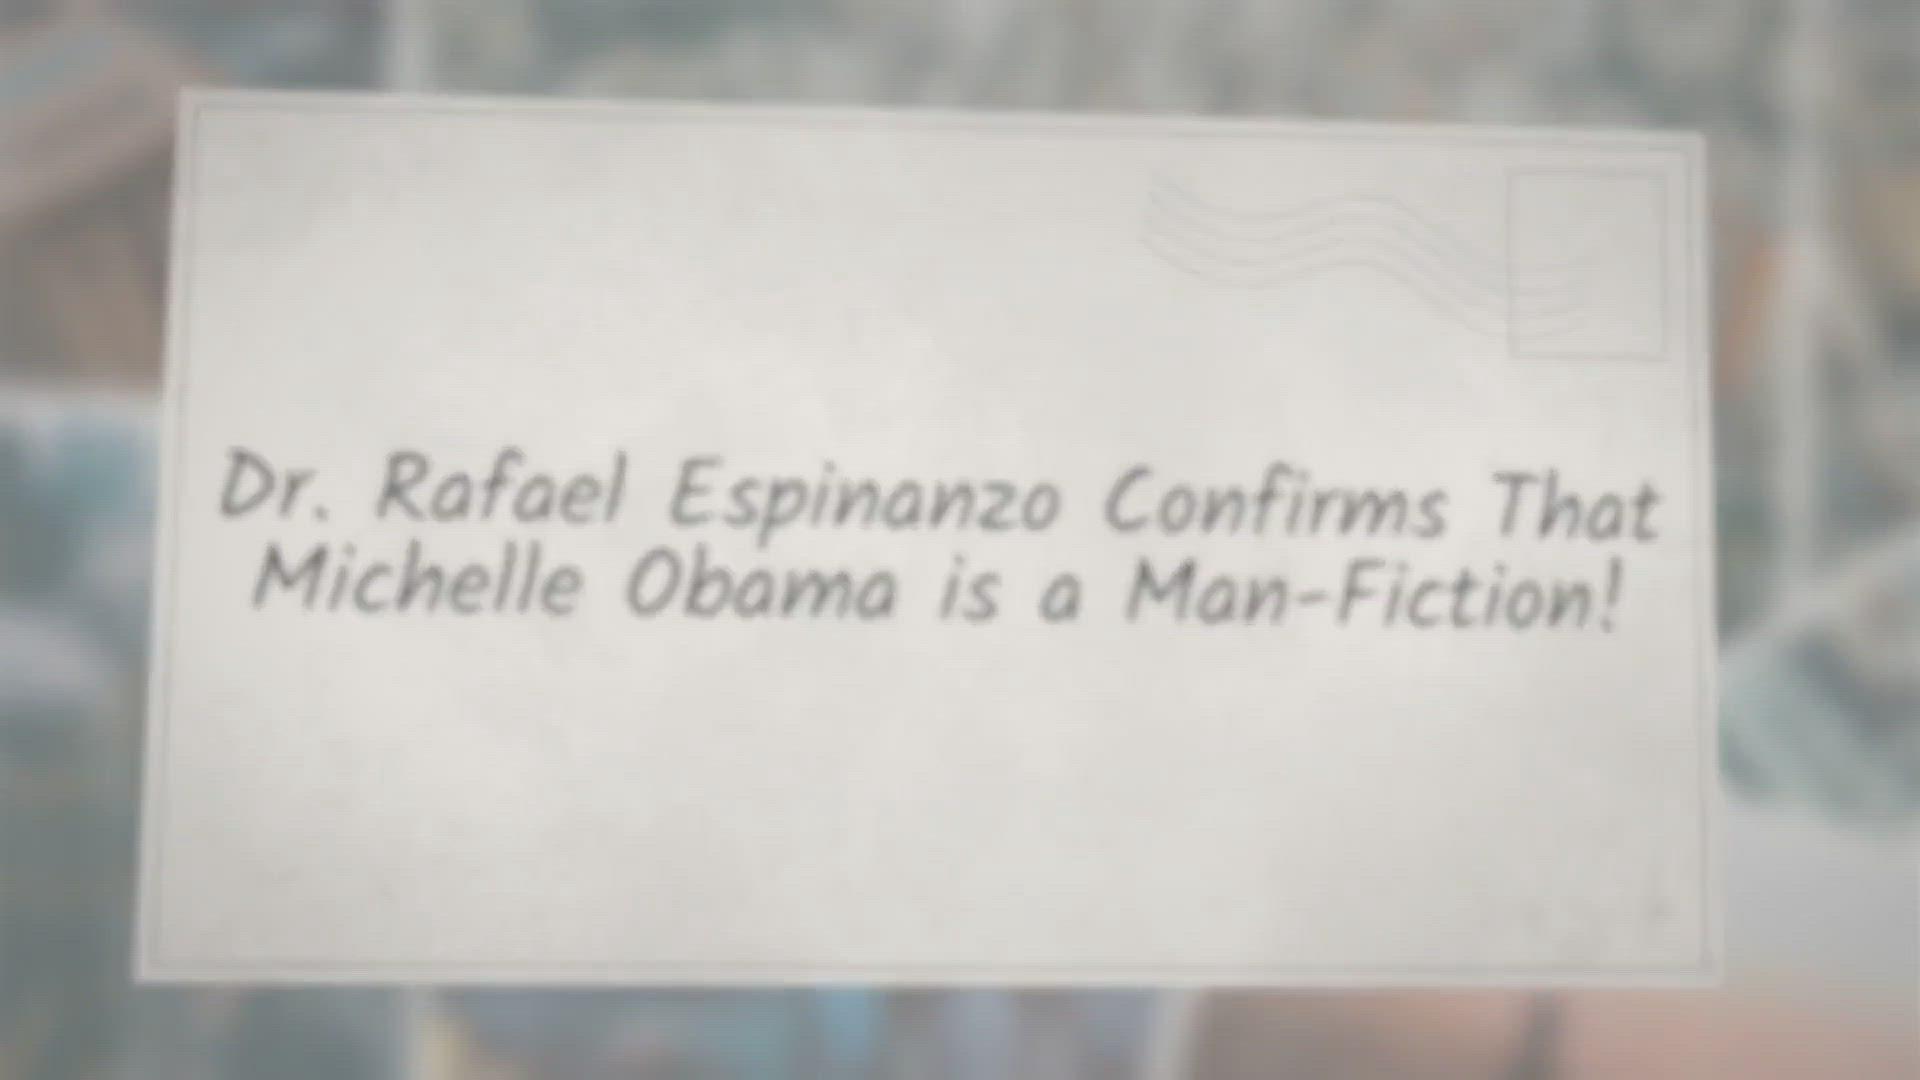 'Video thumbnail for Dr. Rafael Espinanzo Confirms That Michelle Obama is a Man-Fiction!'